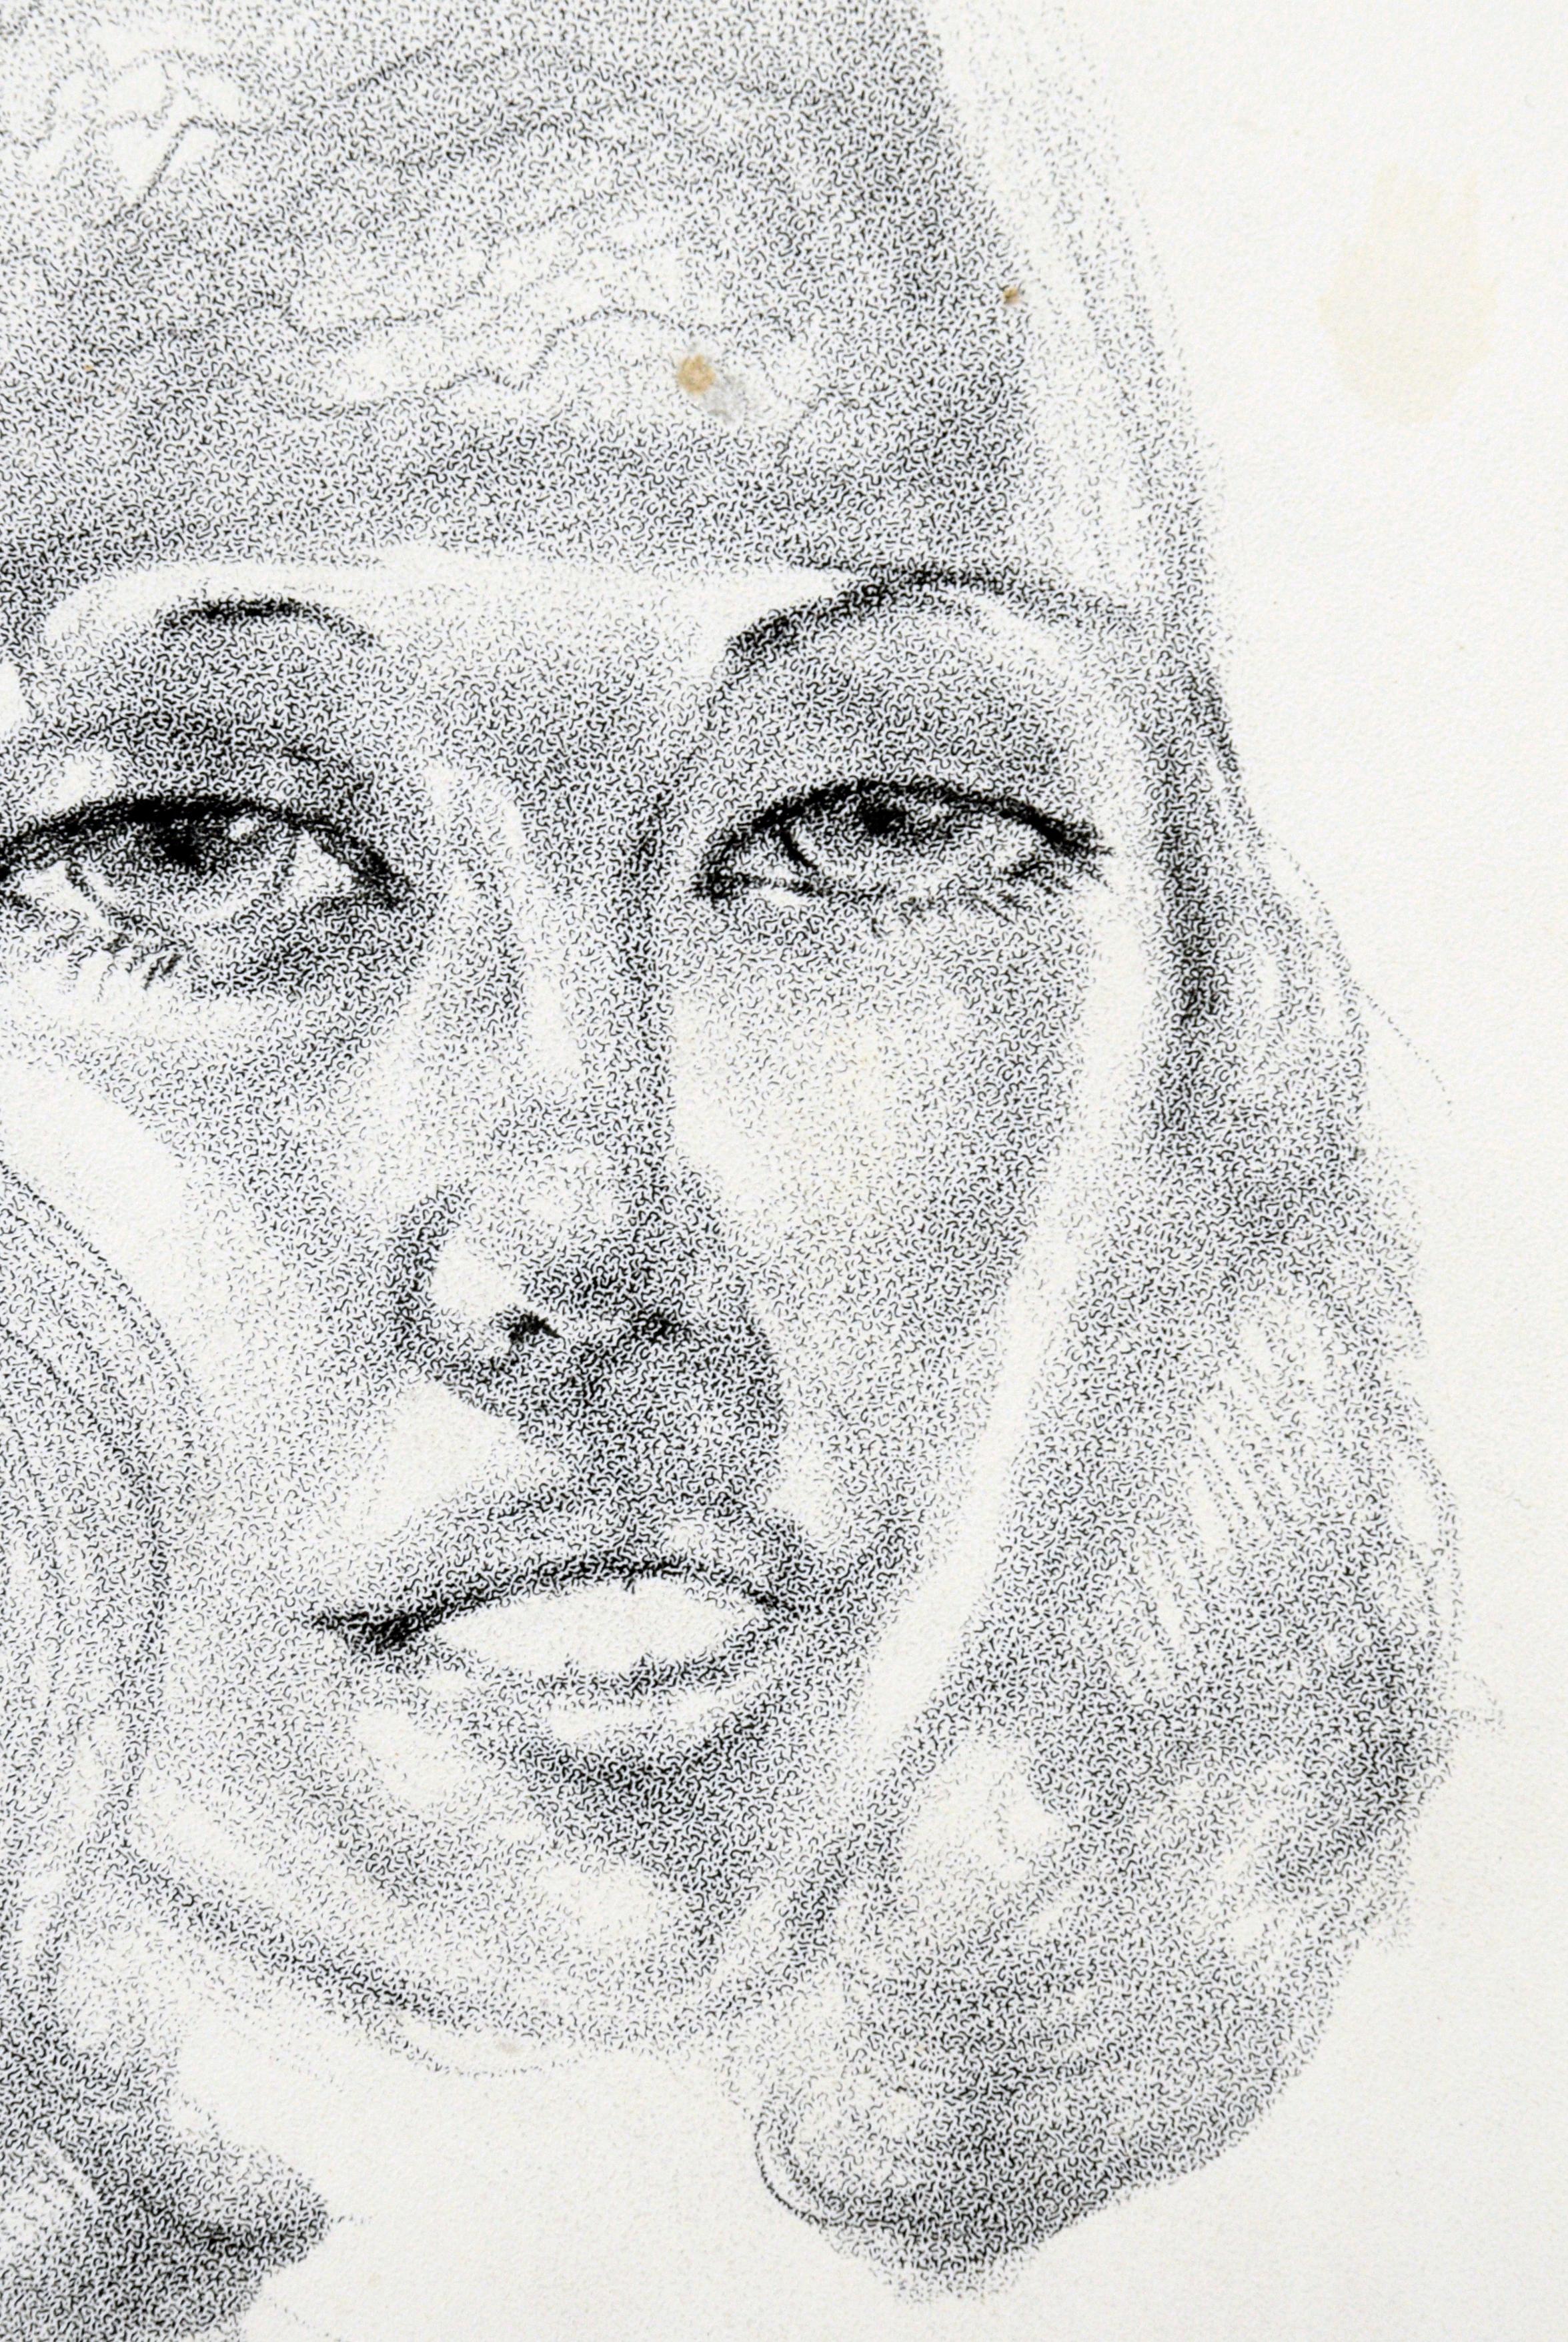 Bohemian Woman - Rare and Signed Graphite Portrait Drawing on Textured Paper - American Modern Print by Eugene Hawkins